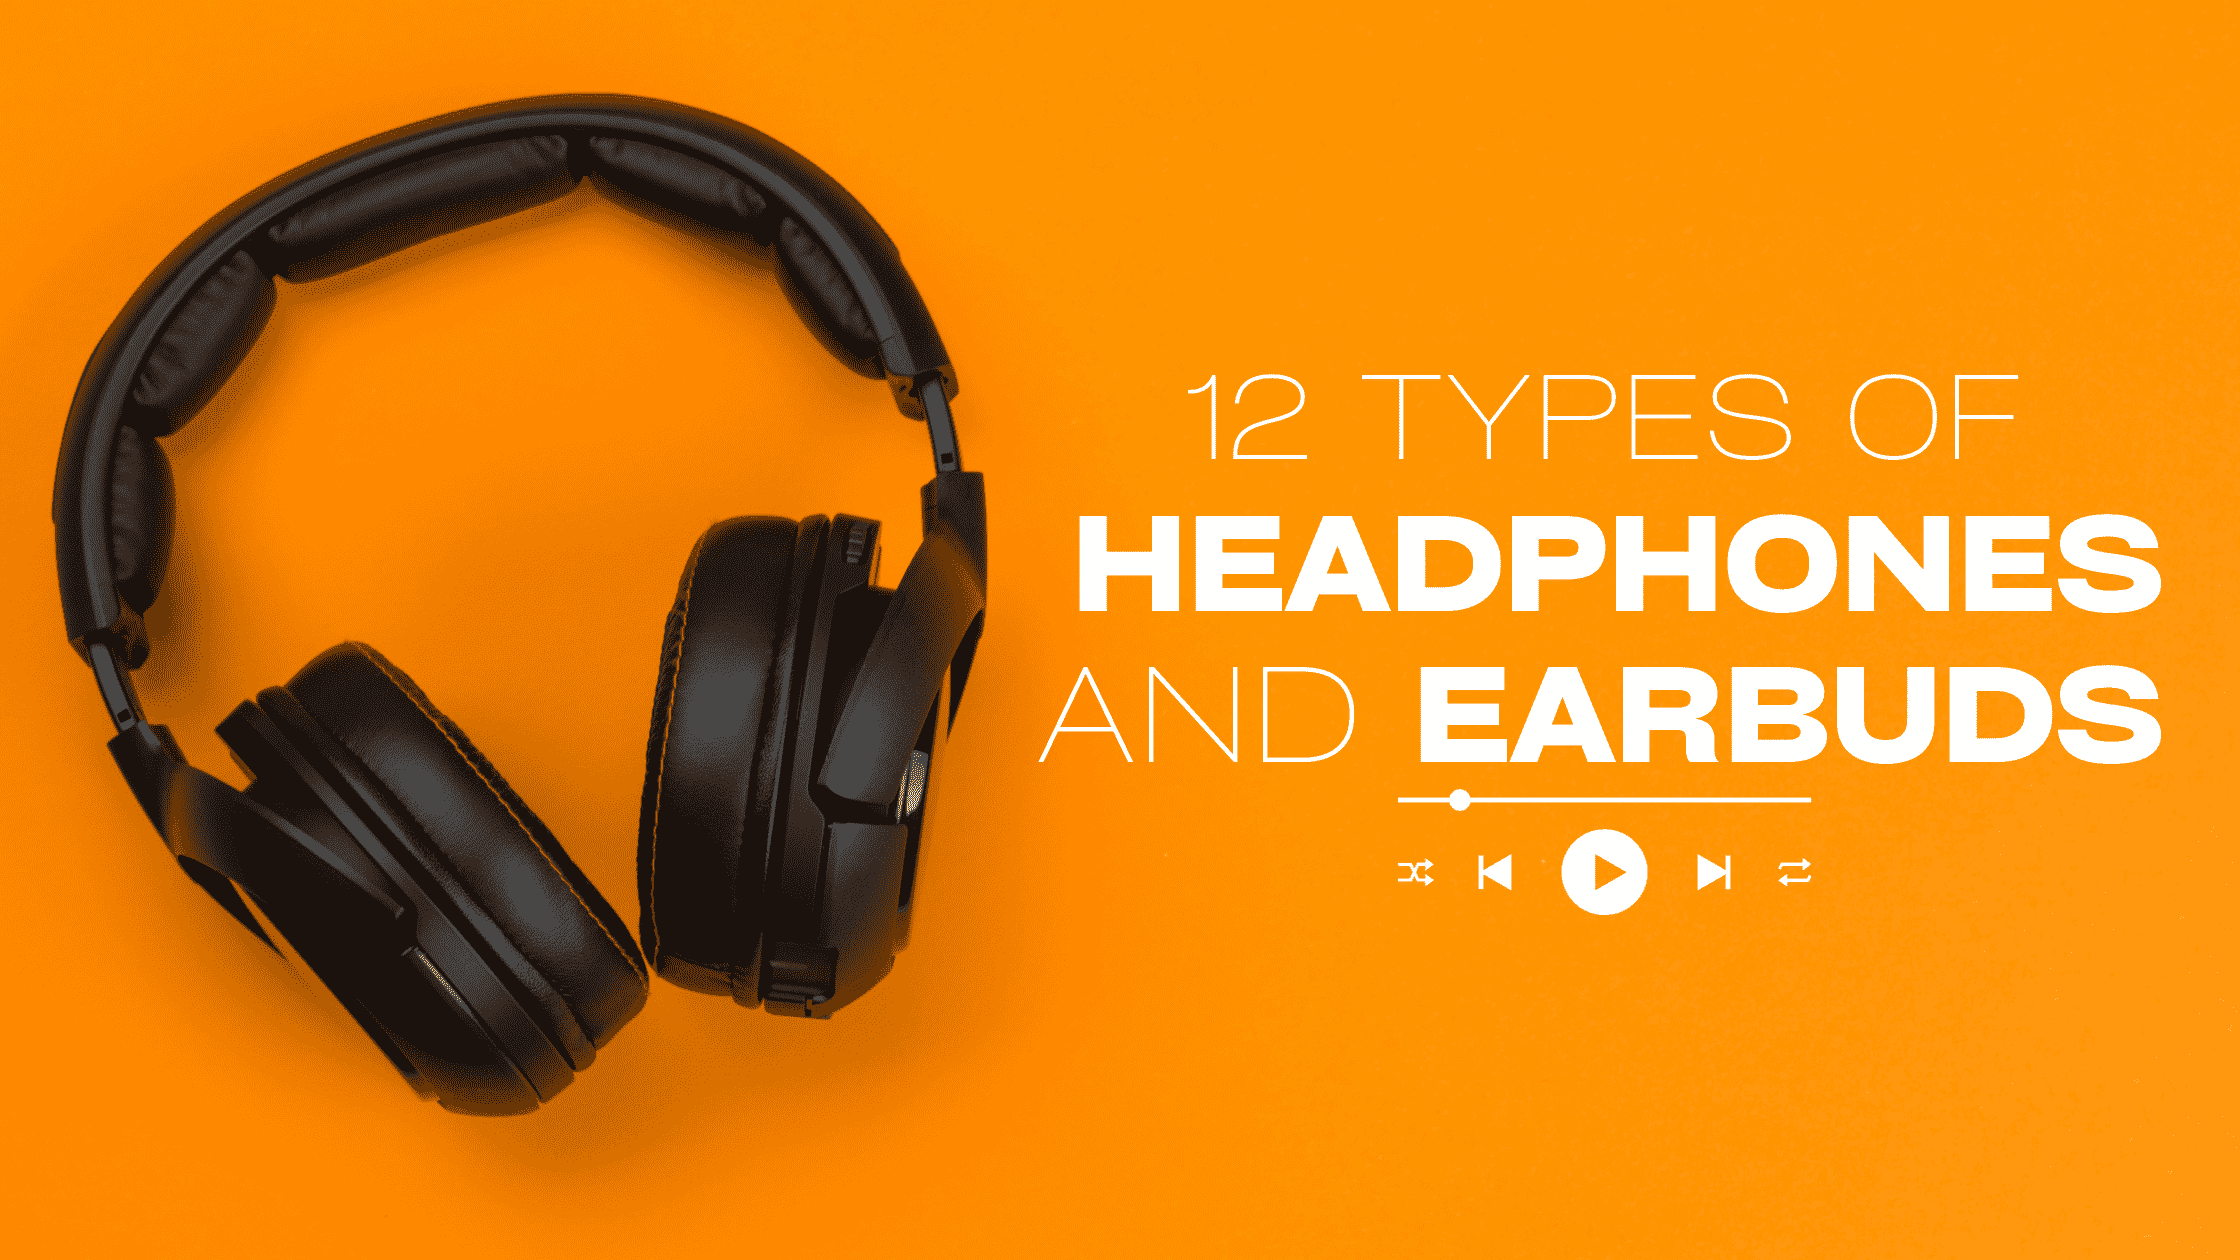 12 Types of Headphones and Earbuds